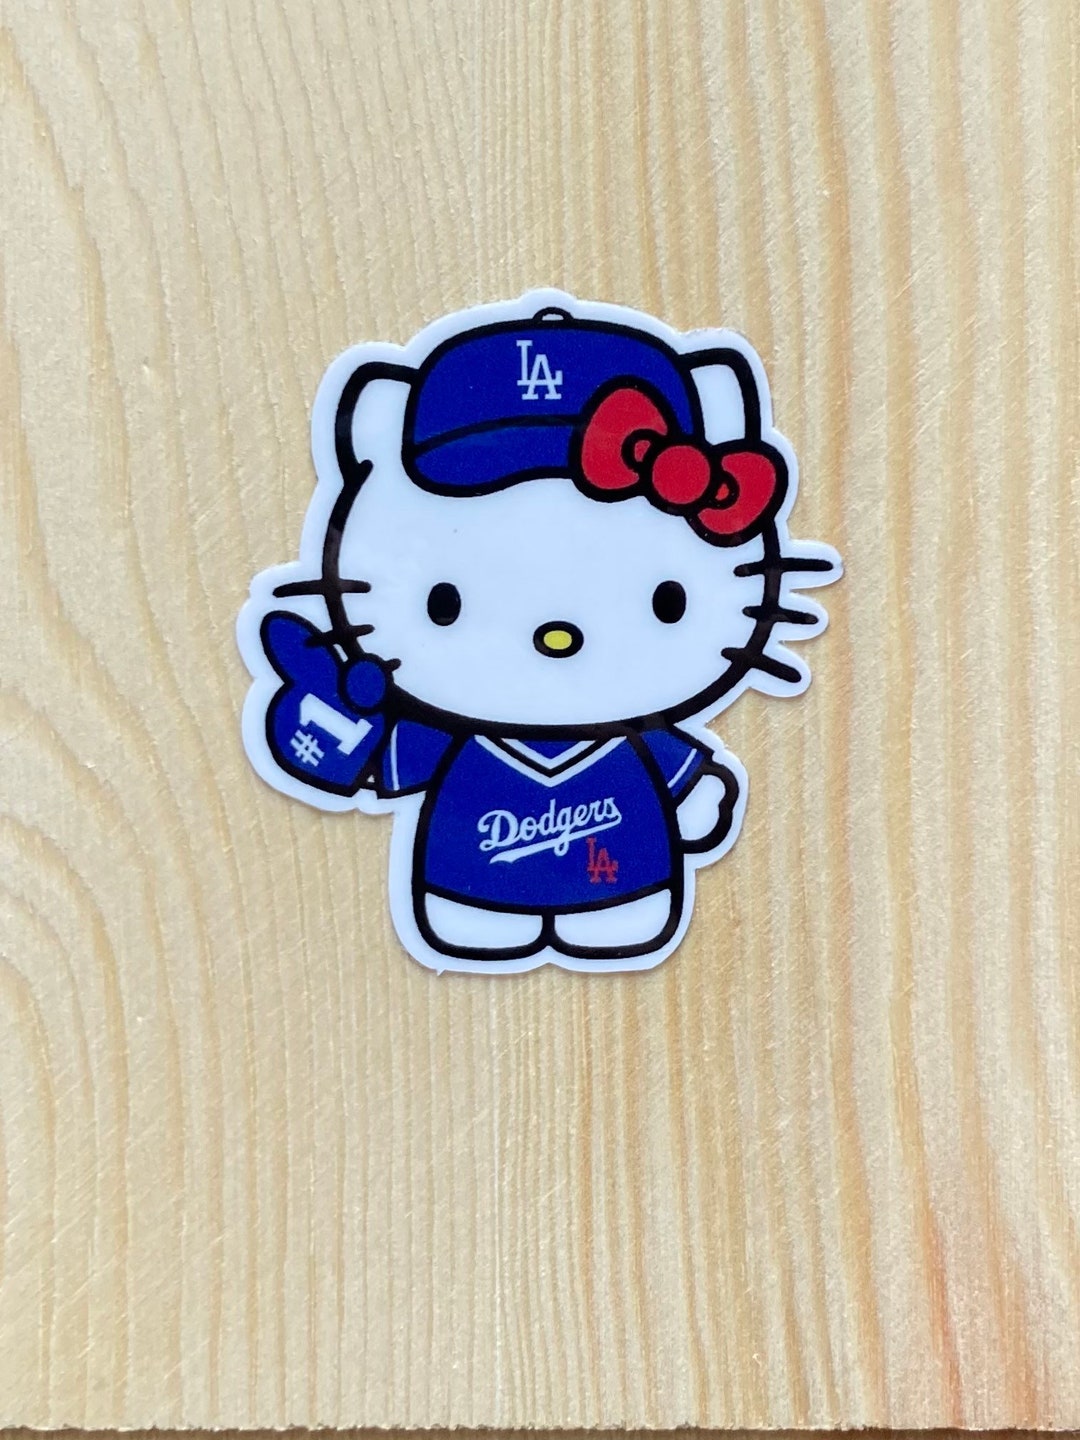 hello kitty dodgers products for sale